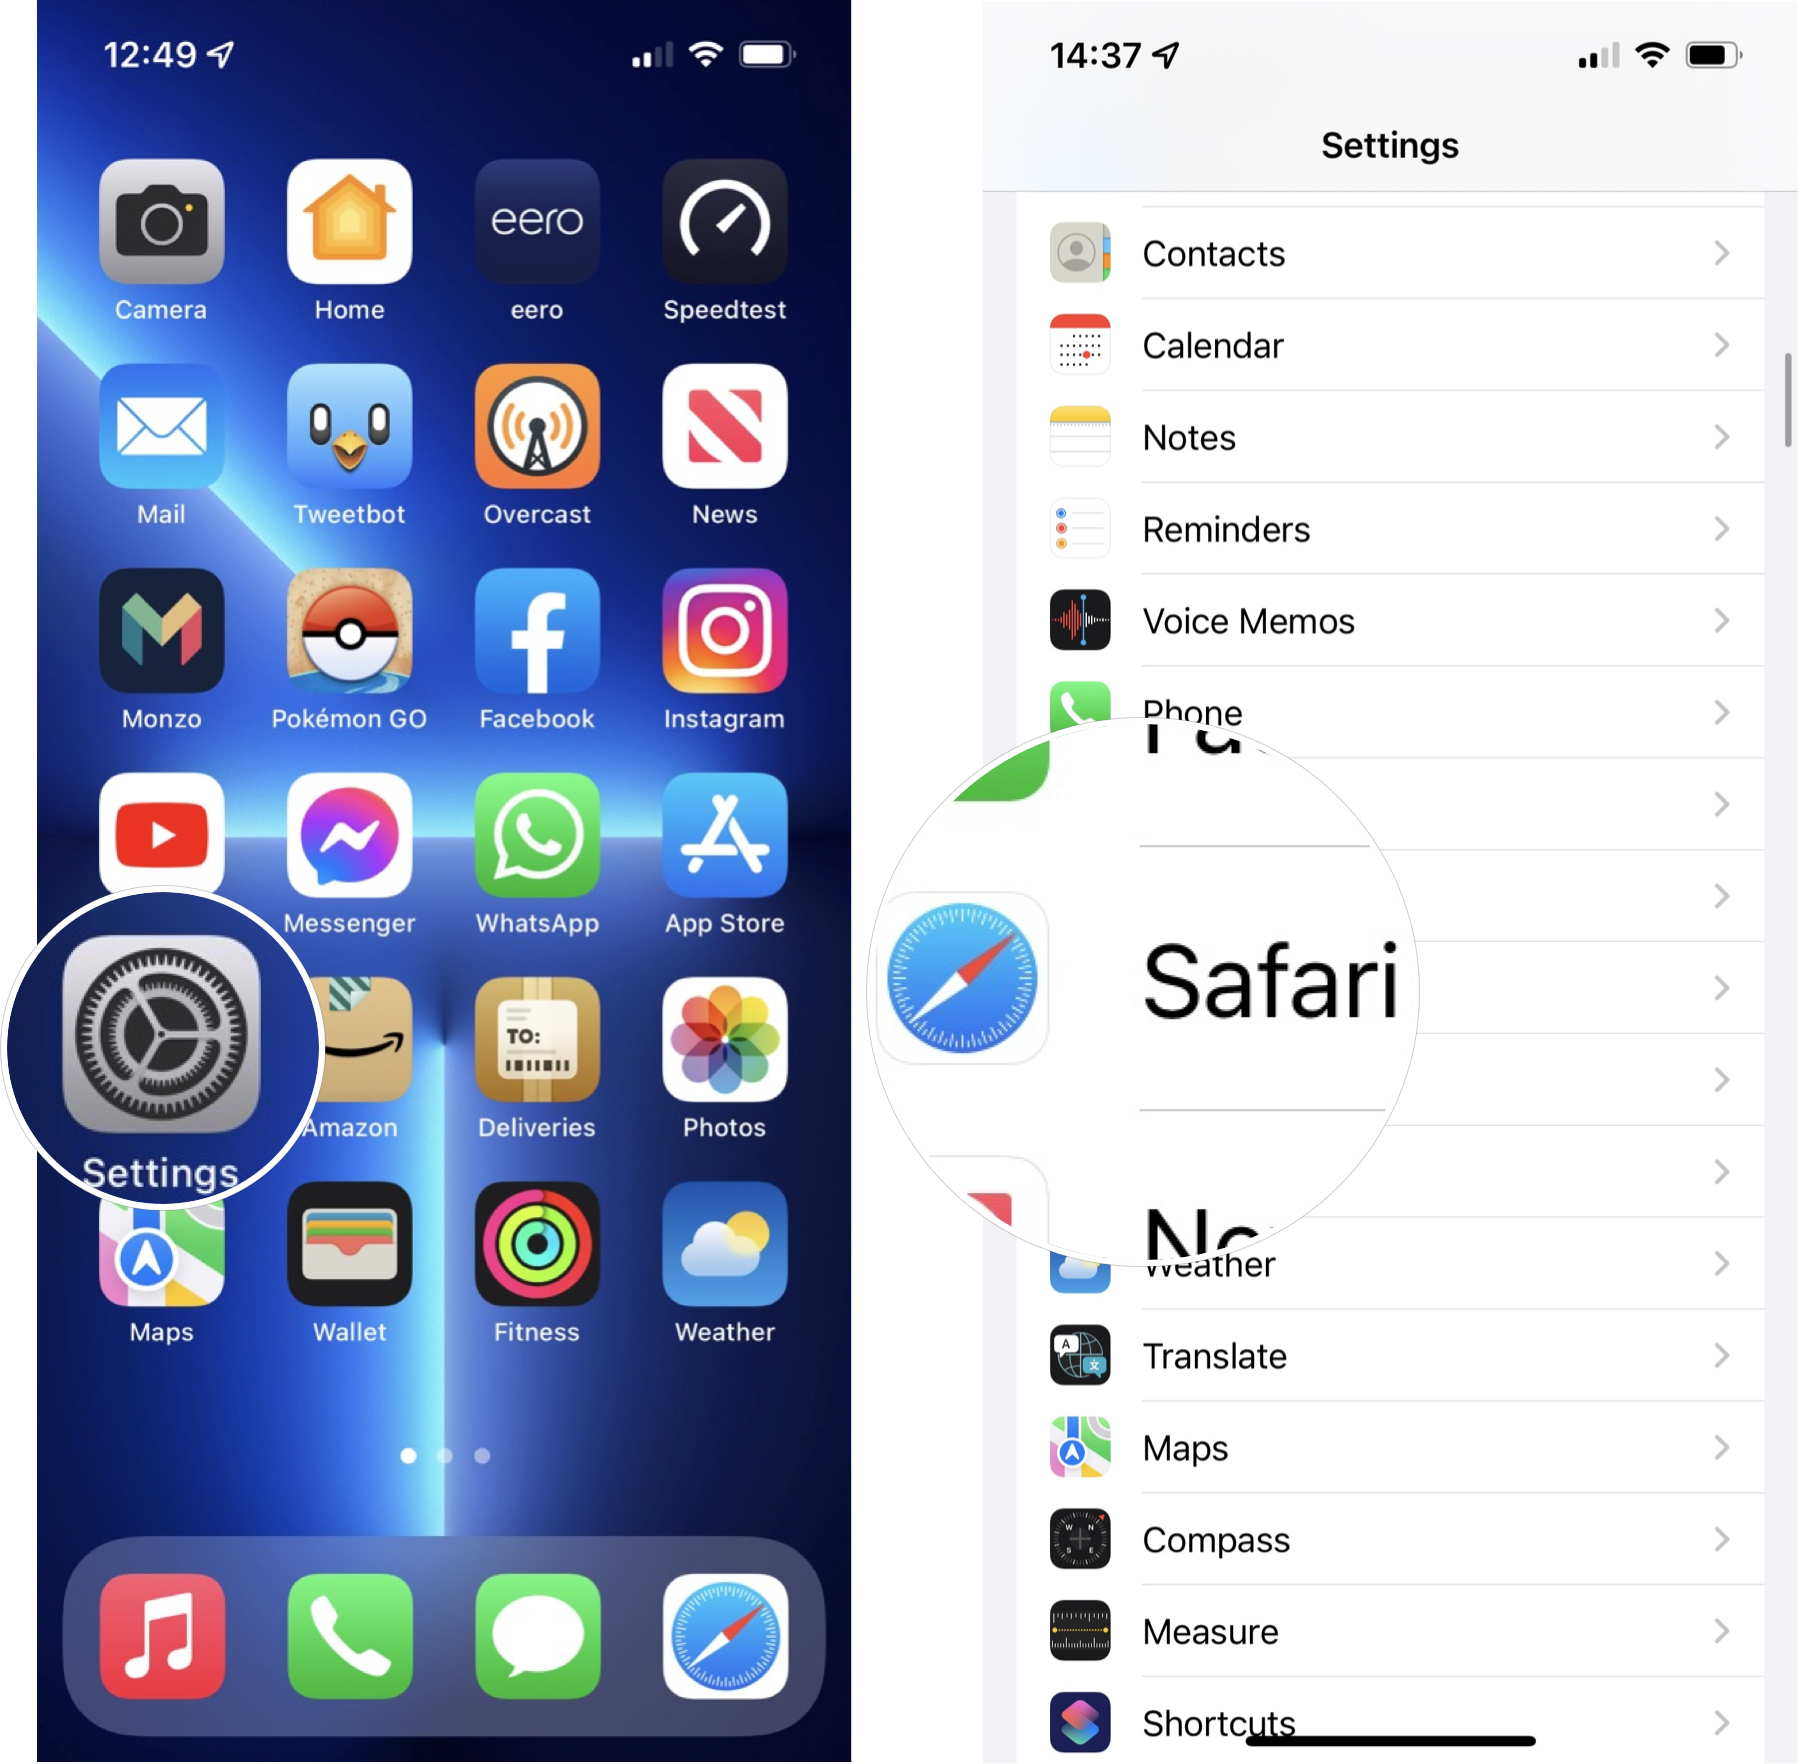 How to block ads on iPhone or iPad: After downloading a content blocker app, open Settings and tap Safari